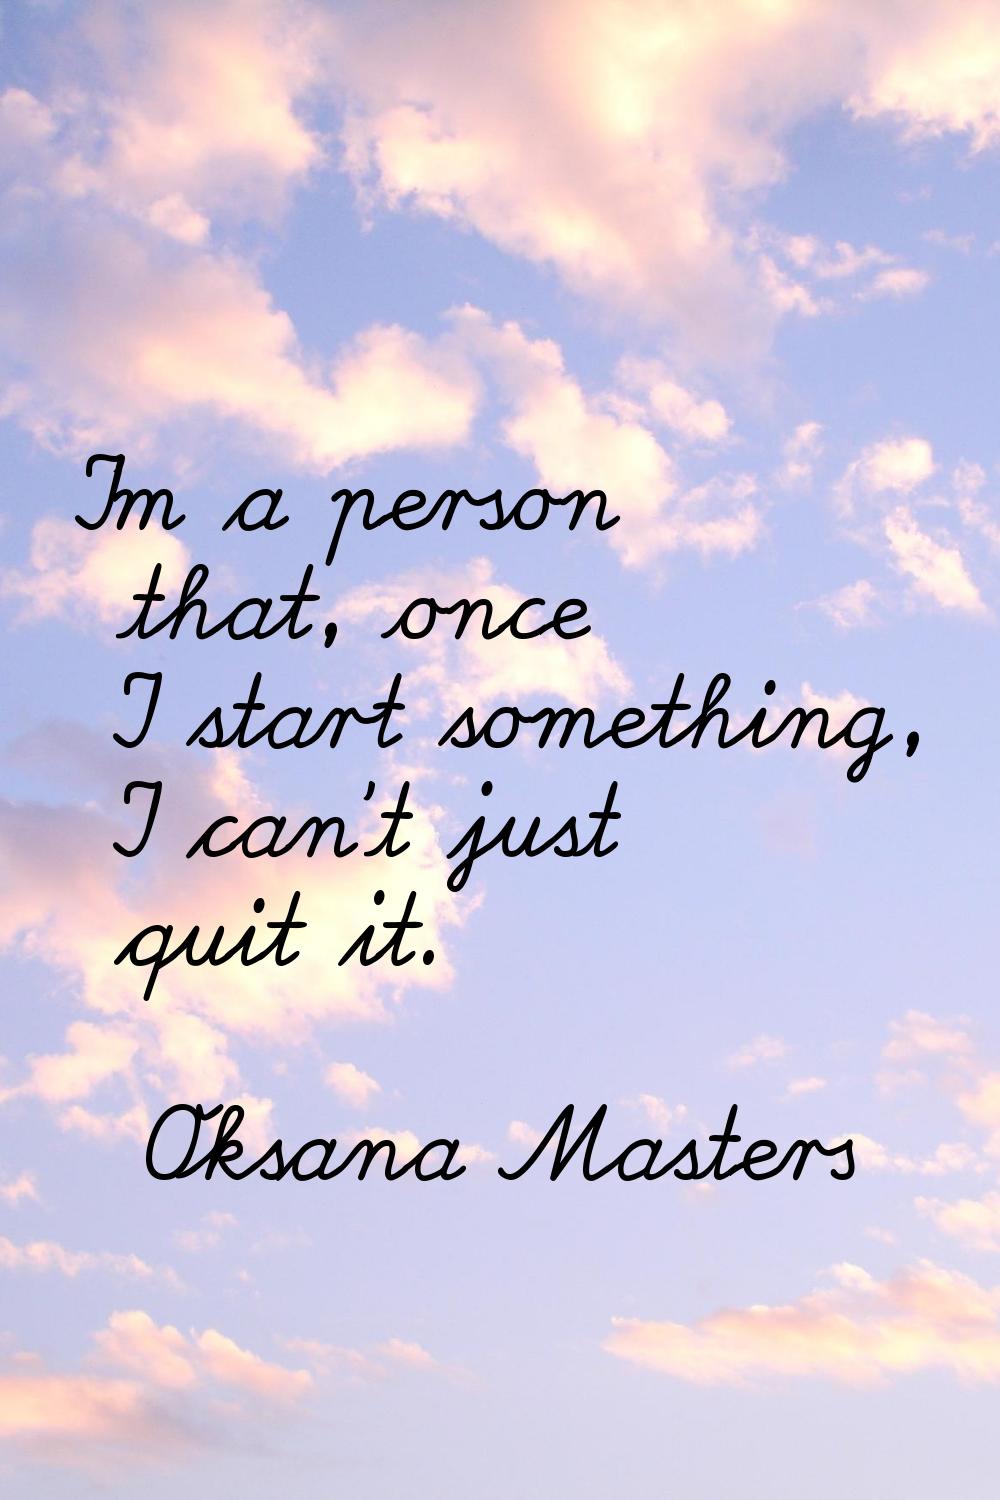 I'm a person that, once I start something, I can't just quit it.